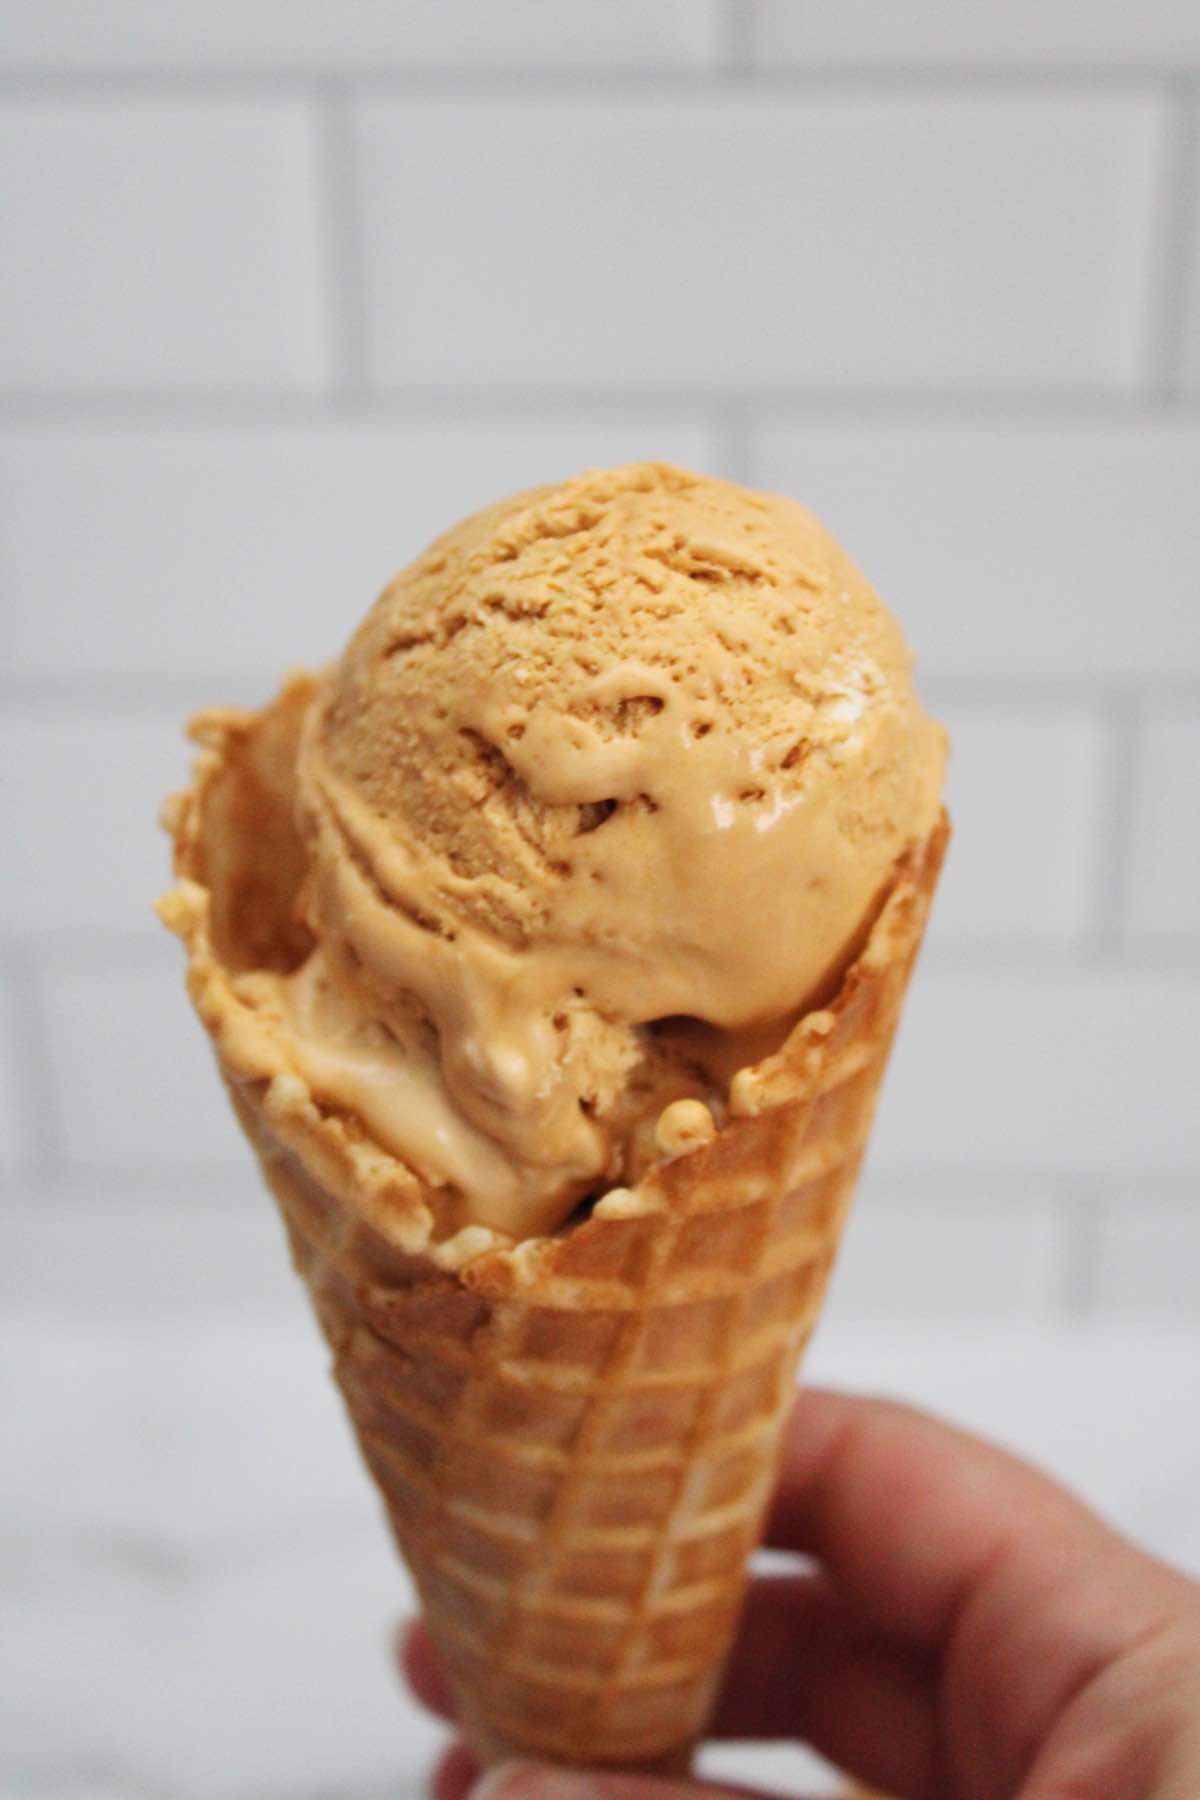 This no churn ice cream is made with 2 ingredients, heavy cream and dulce de leche.